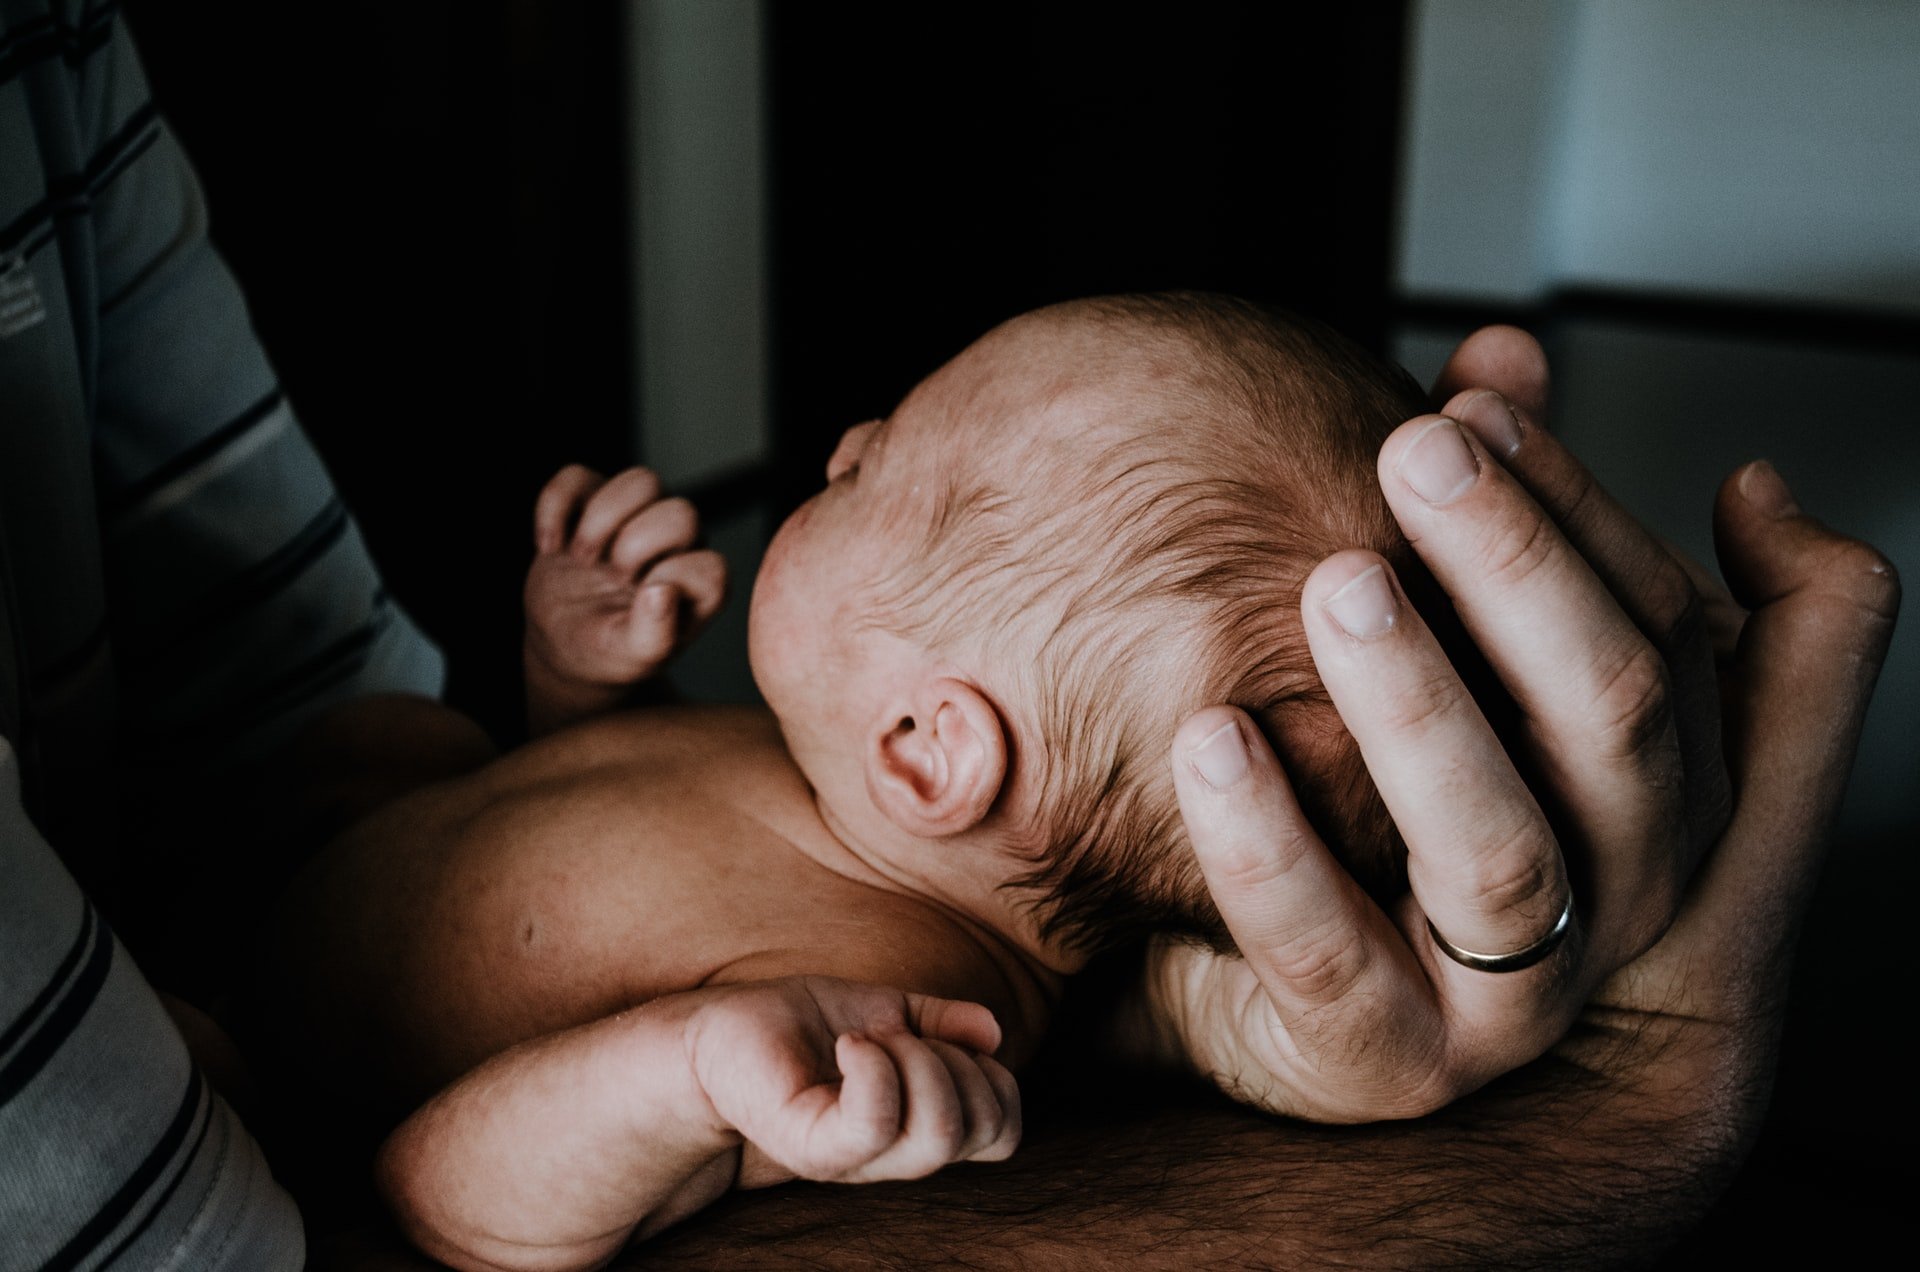 His mother-in-law said she was breastfeeding the baby. | Source: Unsplash